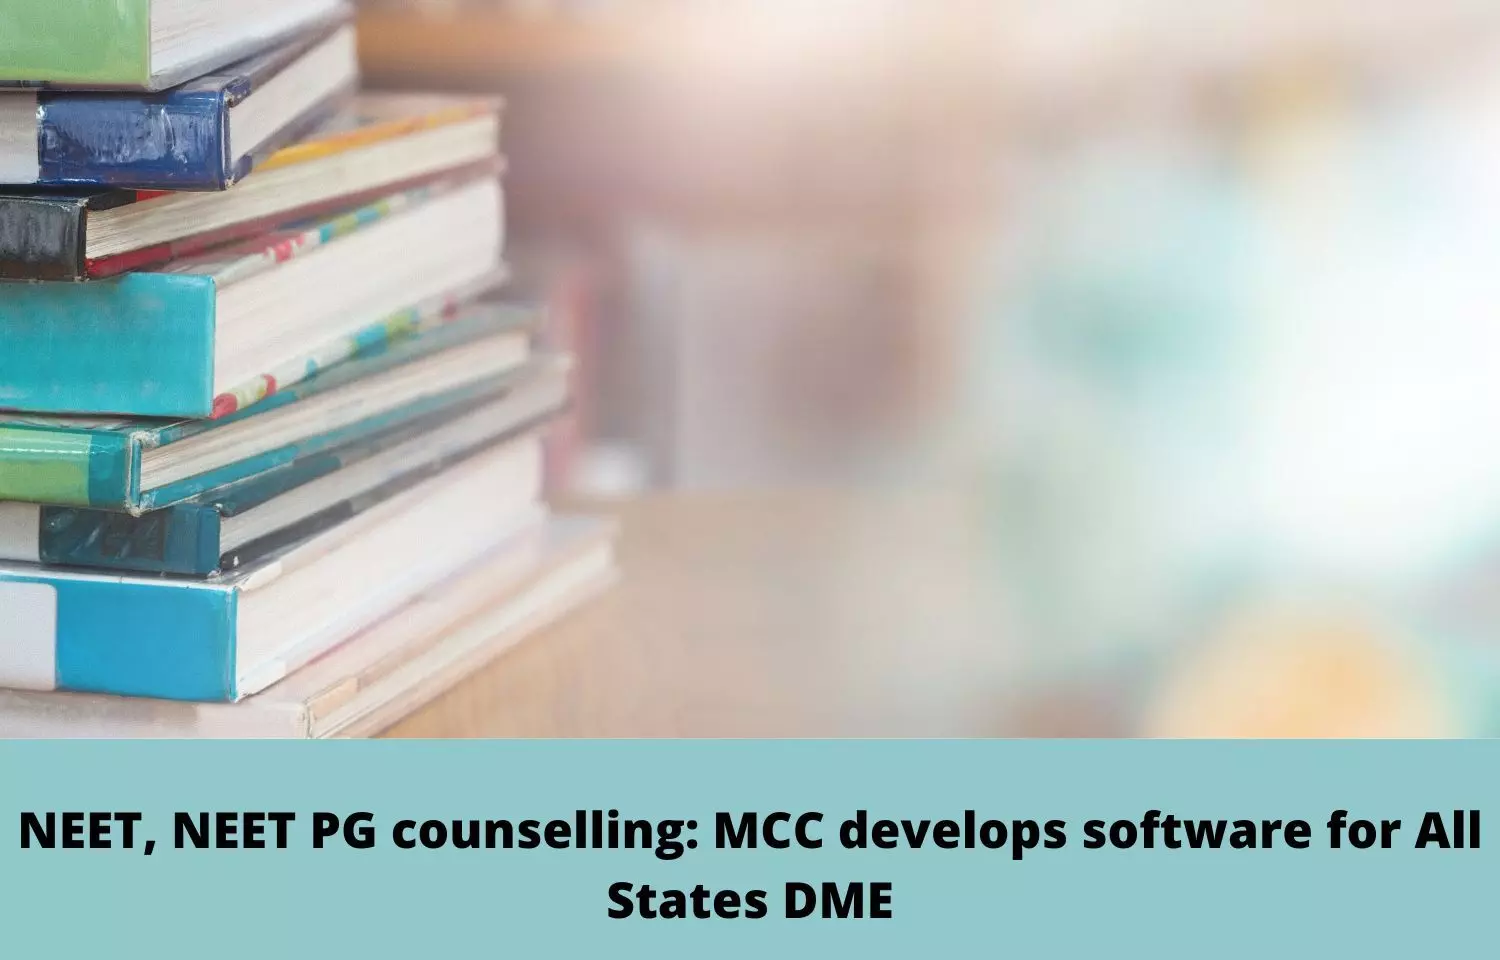 NEET, NEET PG counselling: MCC develops software for All States DME